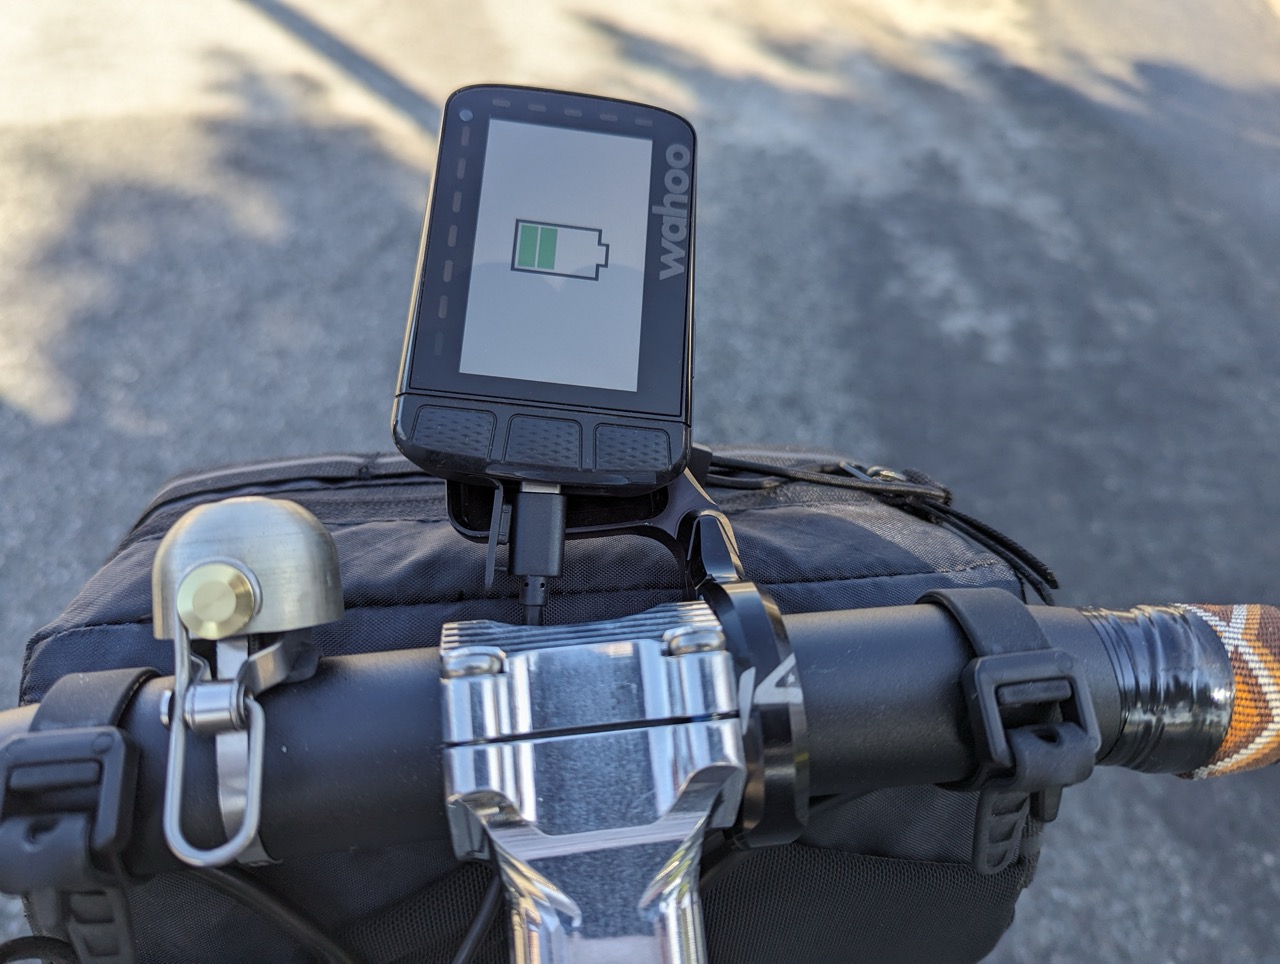 Sinewave Cycles Beacon 2 Review charging on the go